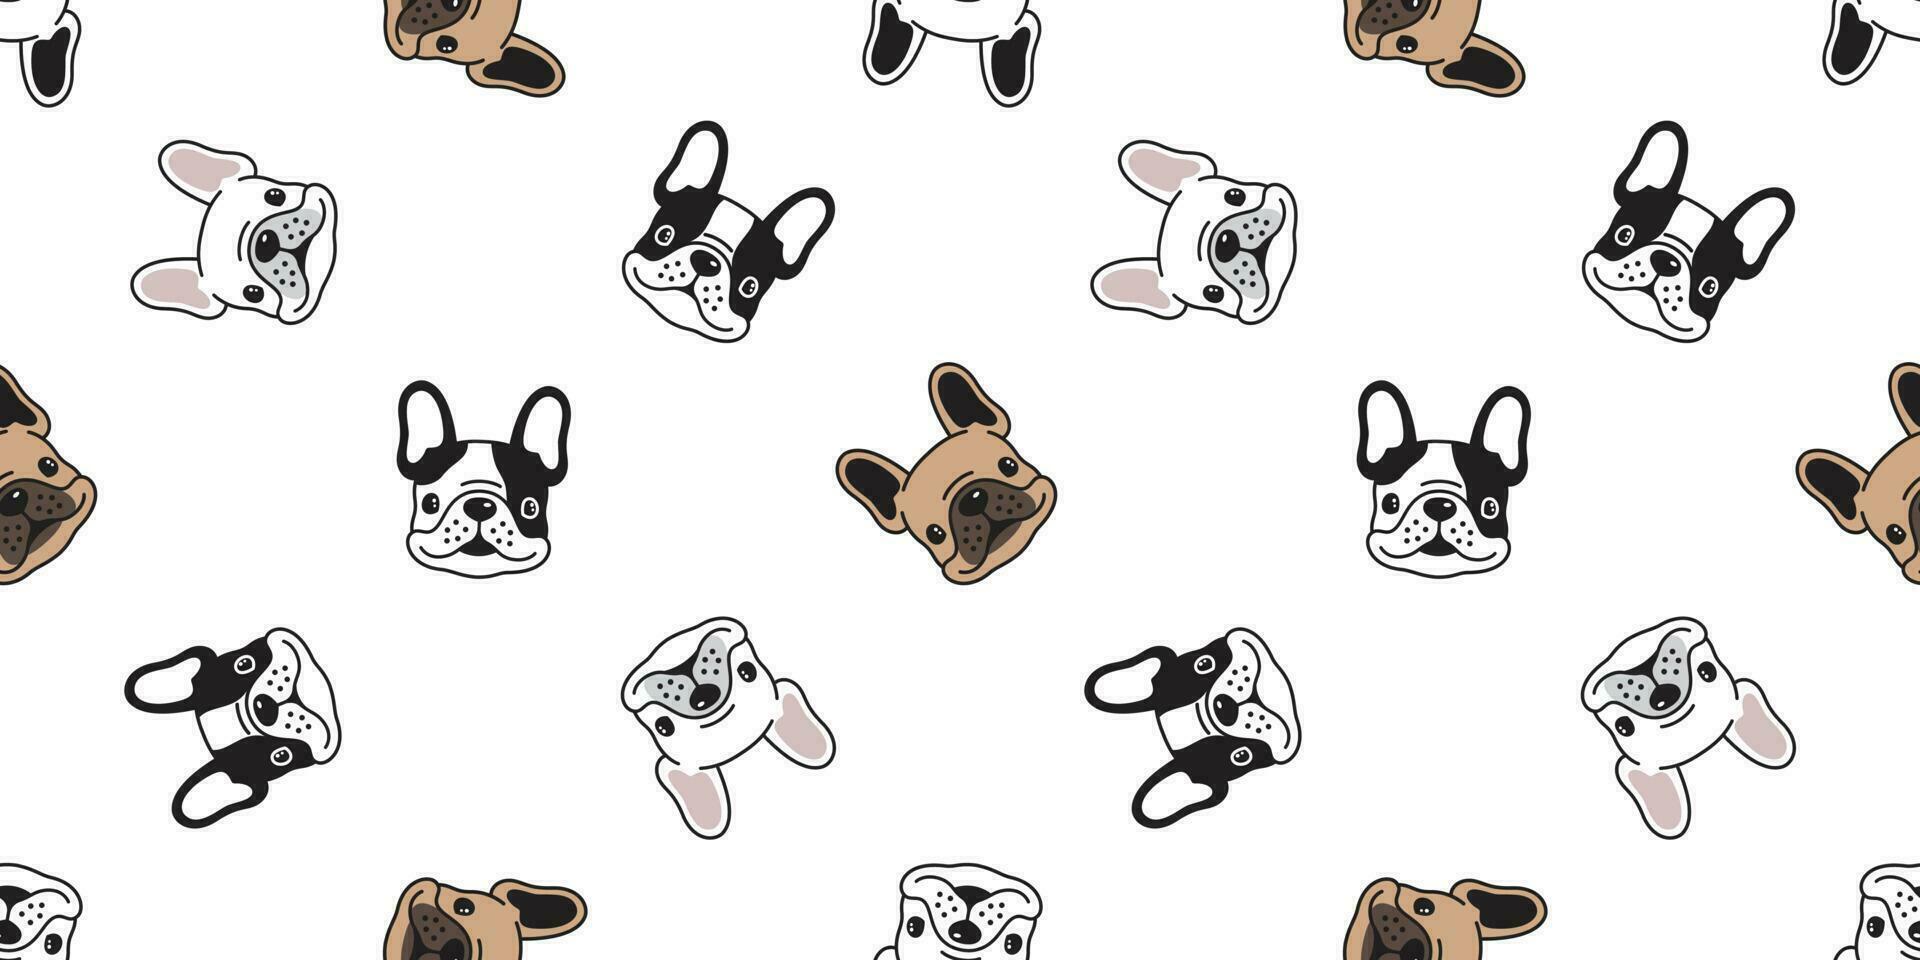 Dog seamless pattern vector french bulldog tile background scarf isolated repeat wallpaper illustration cartoon dog breed